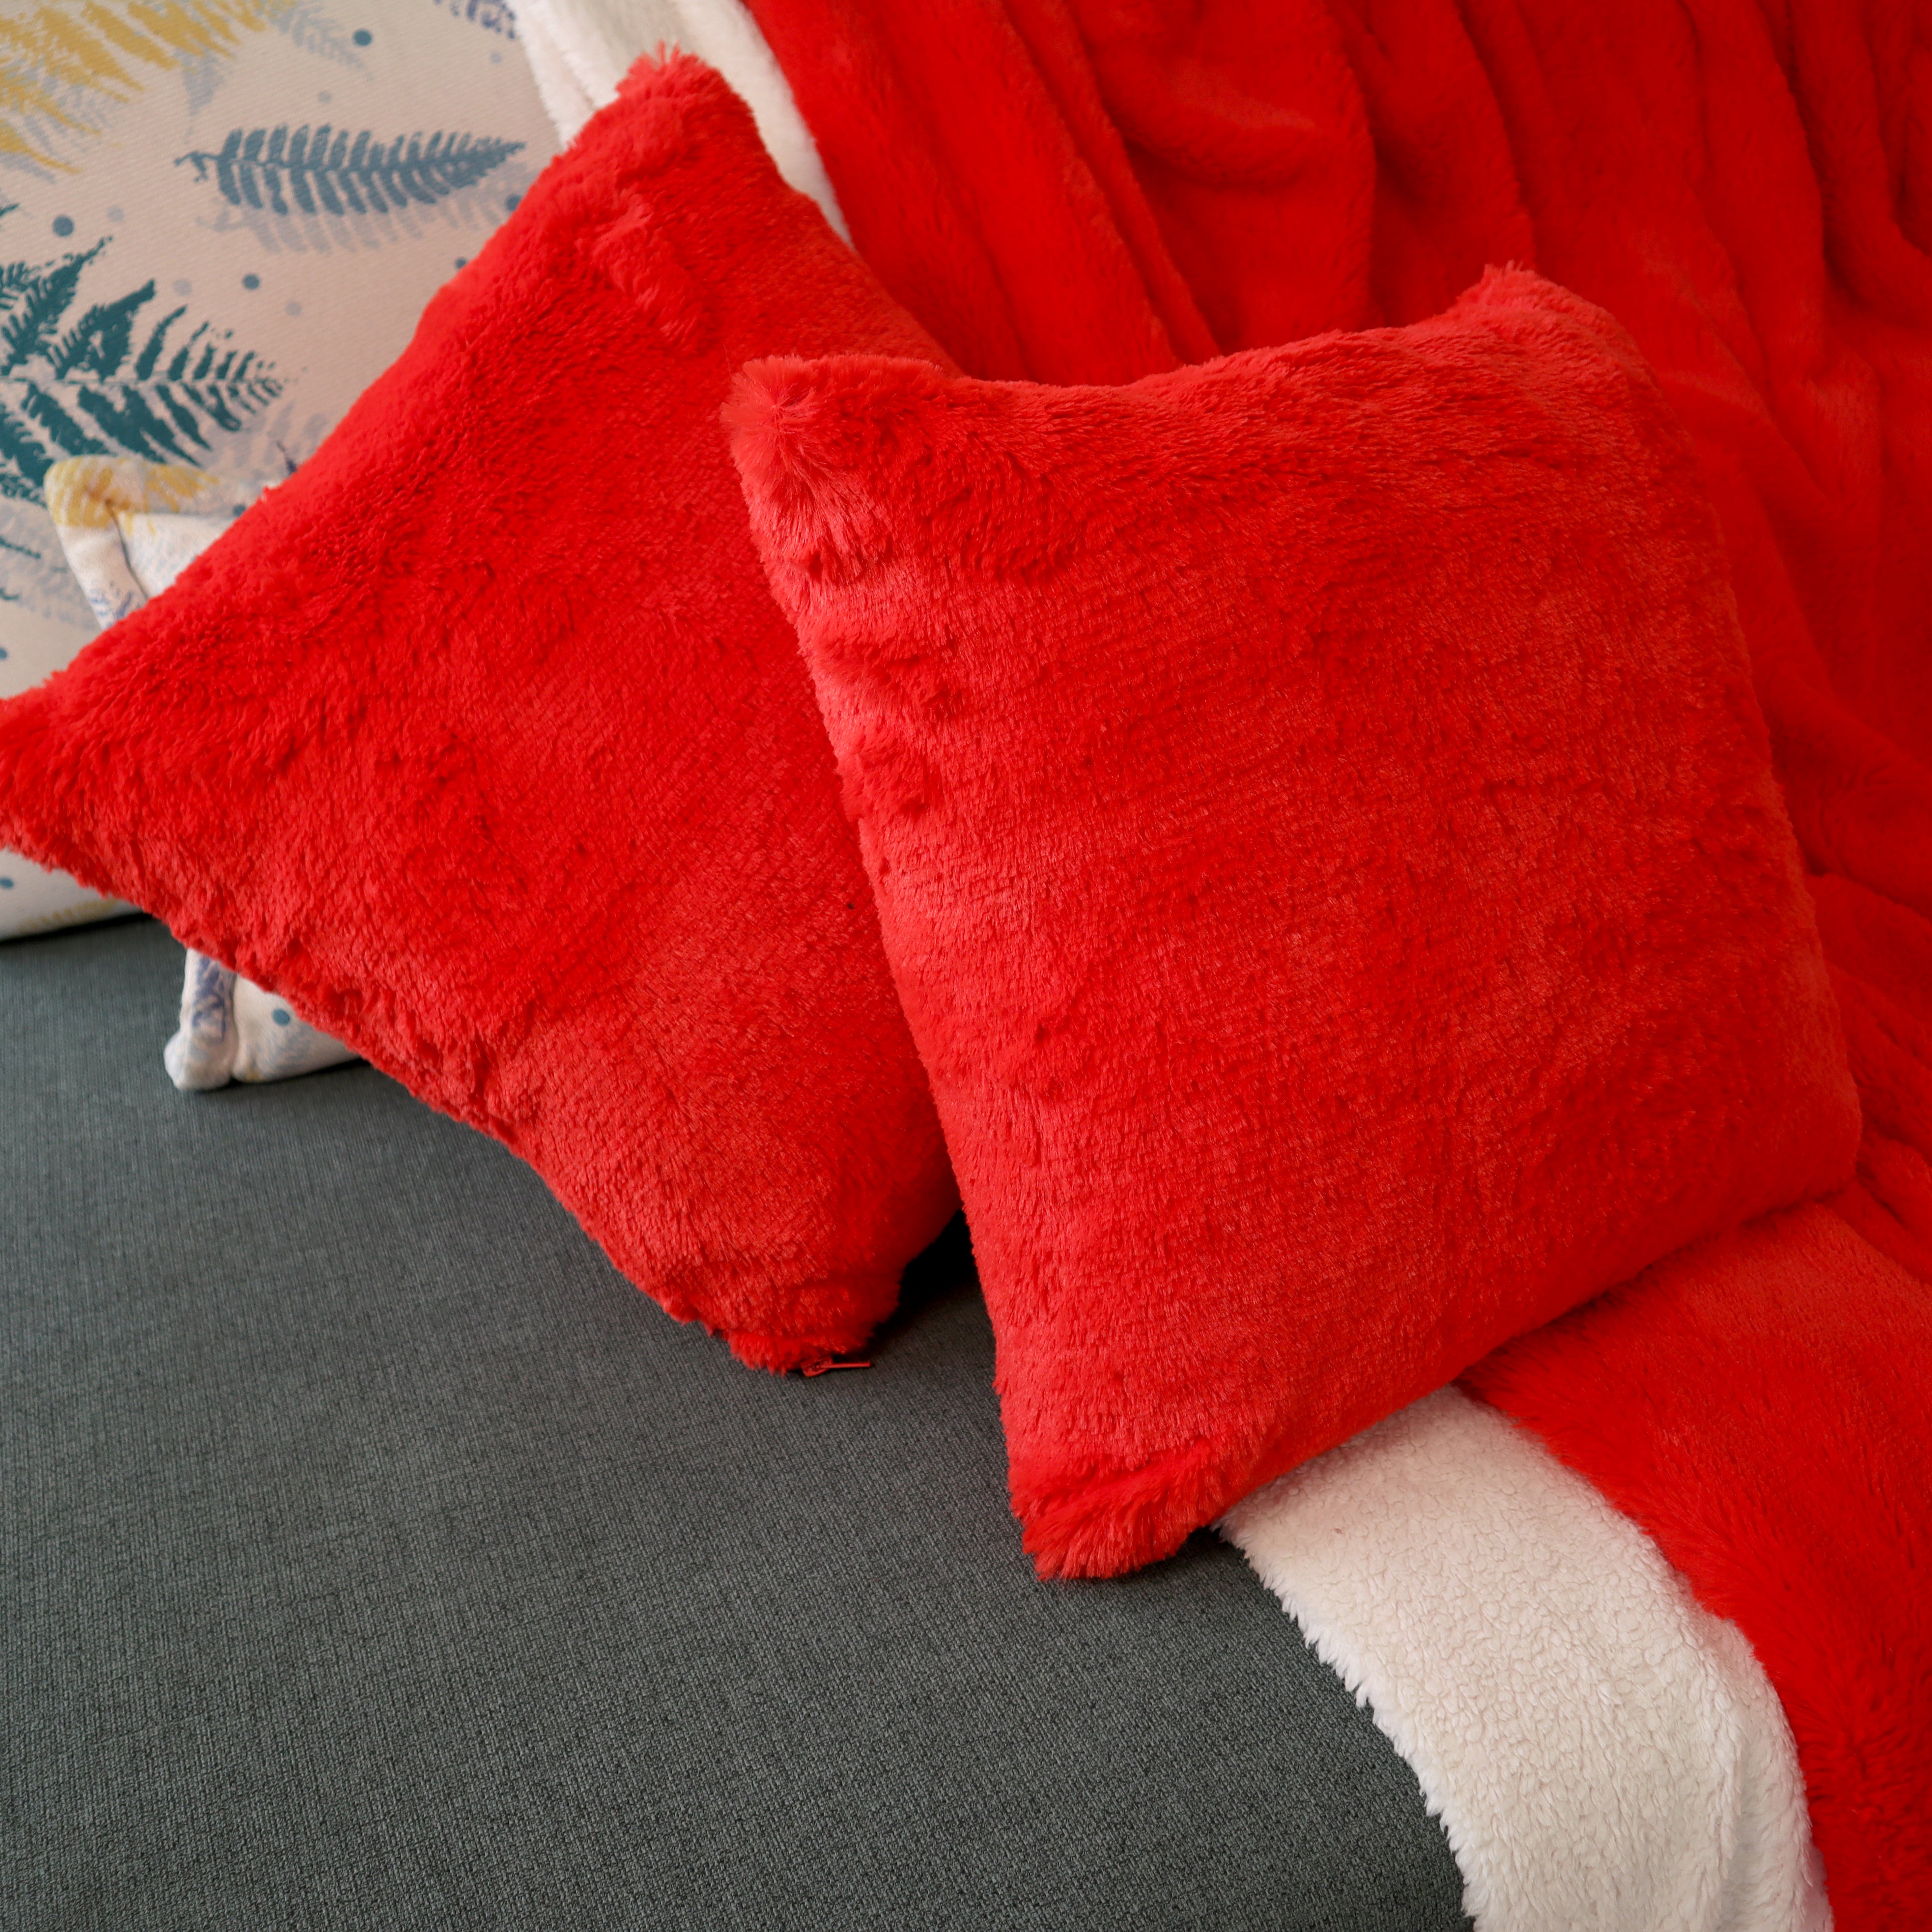 Double Bed Sherpa Blanket and Cushions-Red